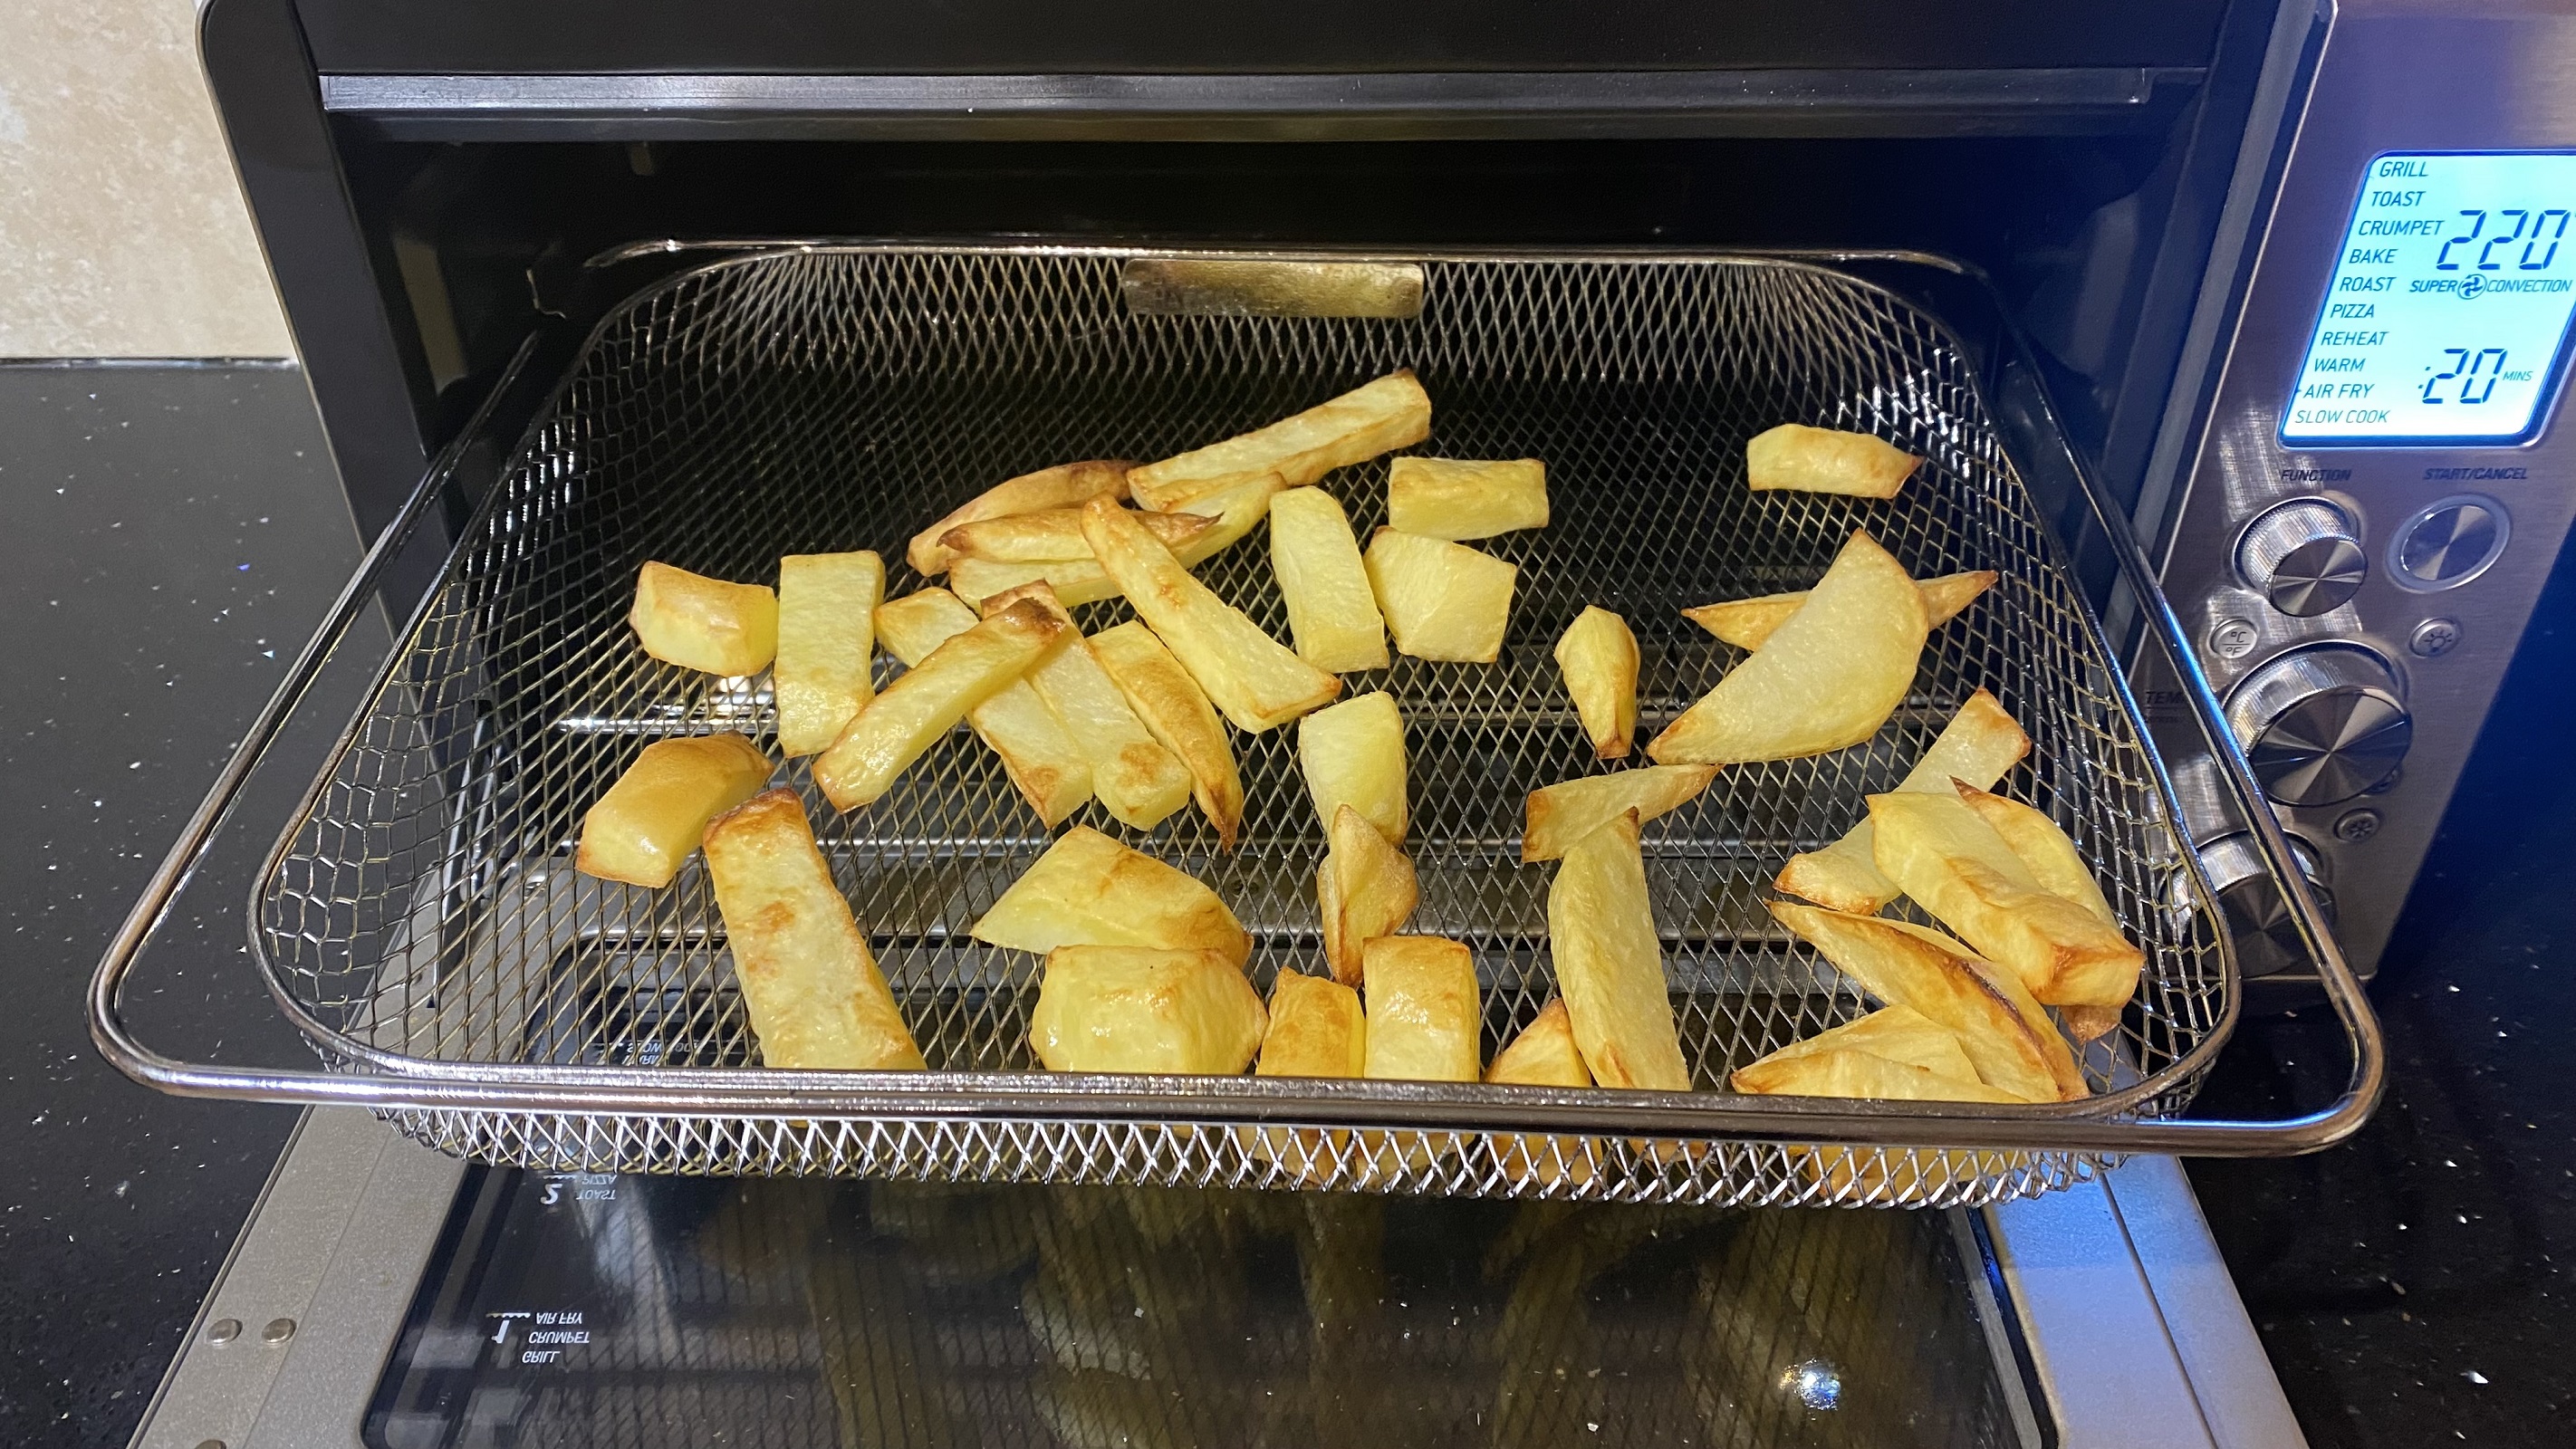 Cooking frozen chips using sage the smart oven air fryer